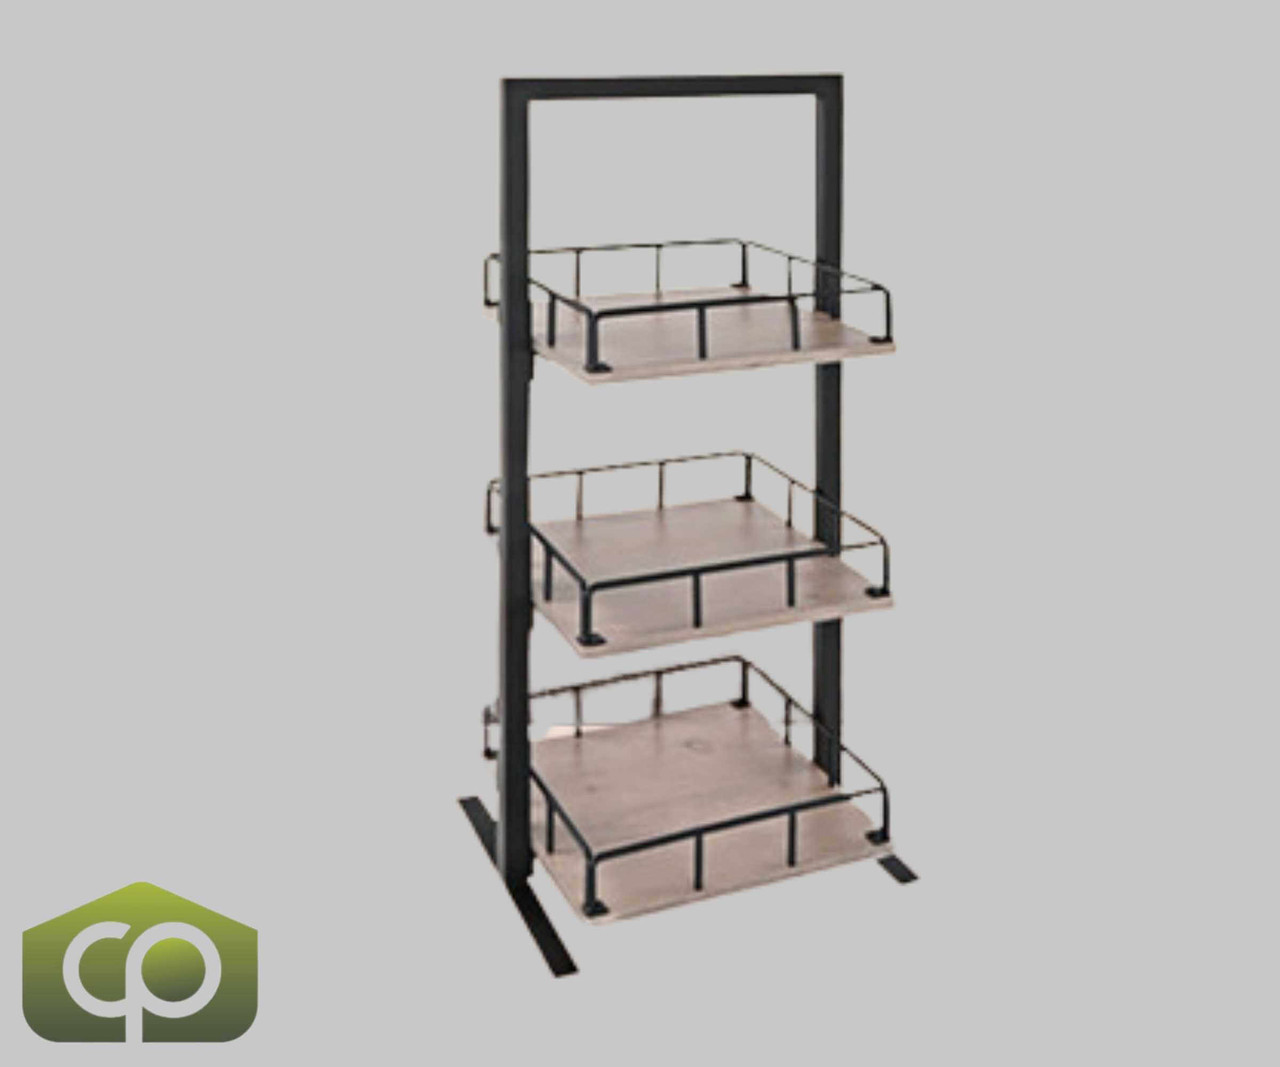 Cal-Mil Aspen 12" x 12" x 31" 3-Tier Gray Pine Merchandiser | Stylish Display for Fresh Pastries, Fruit, and More